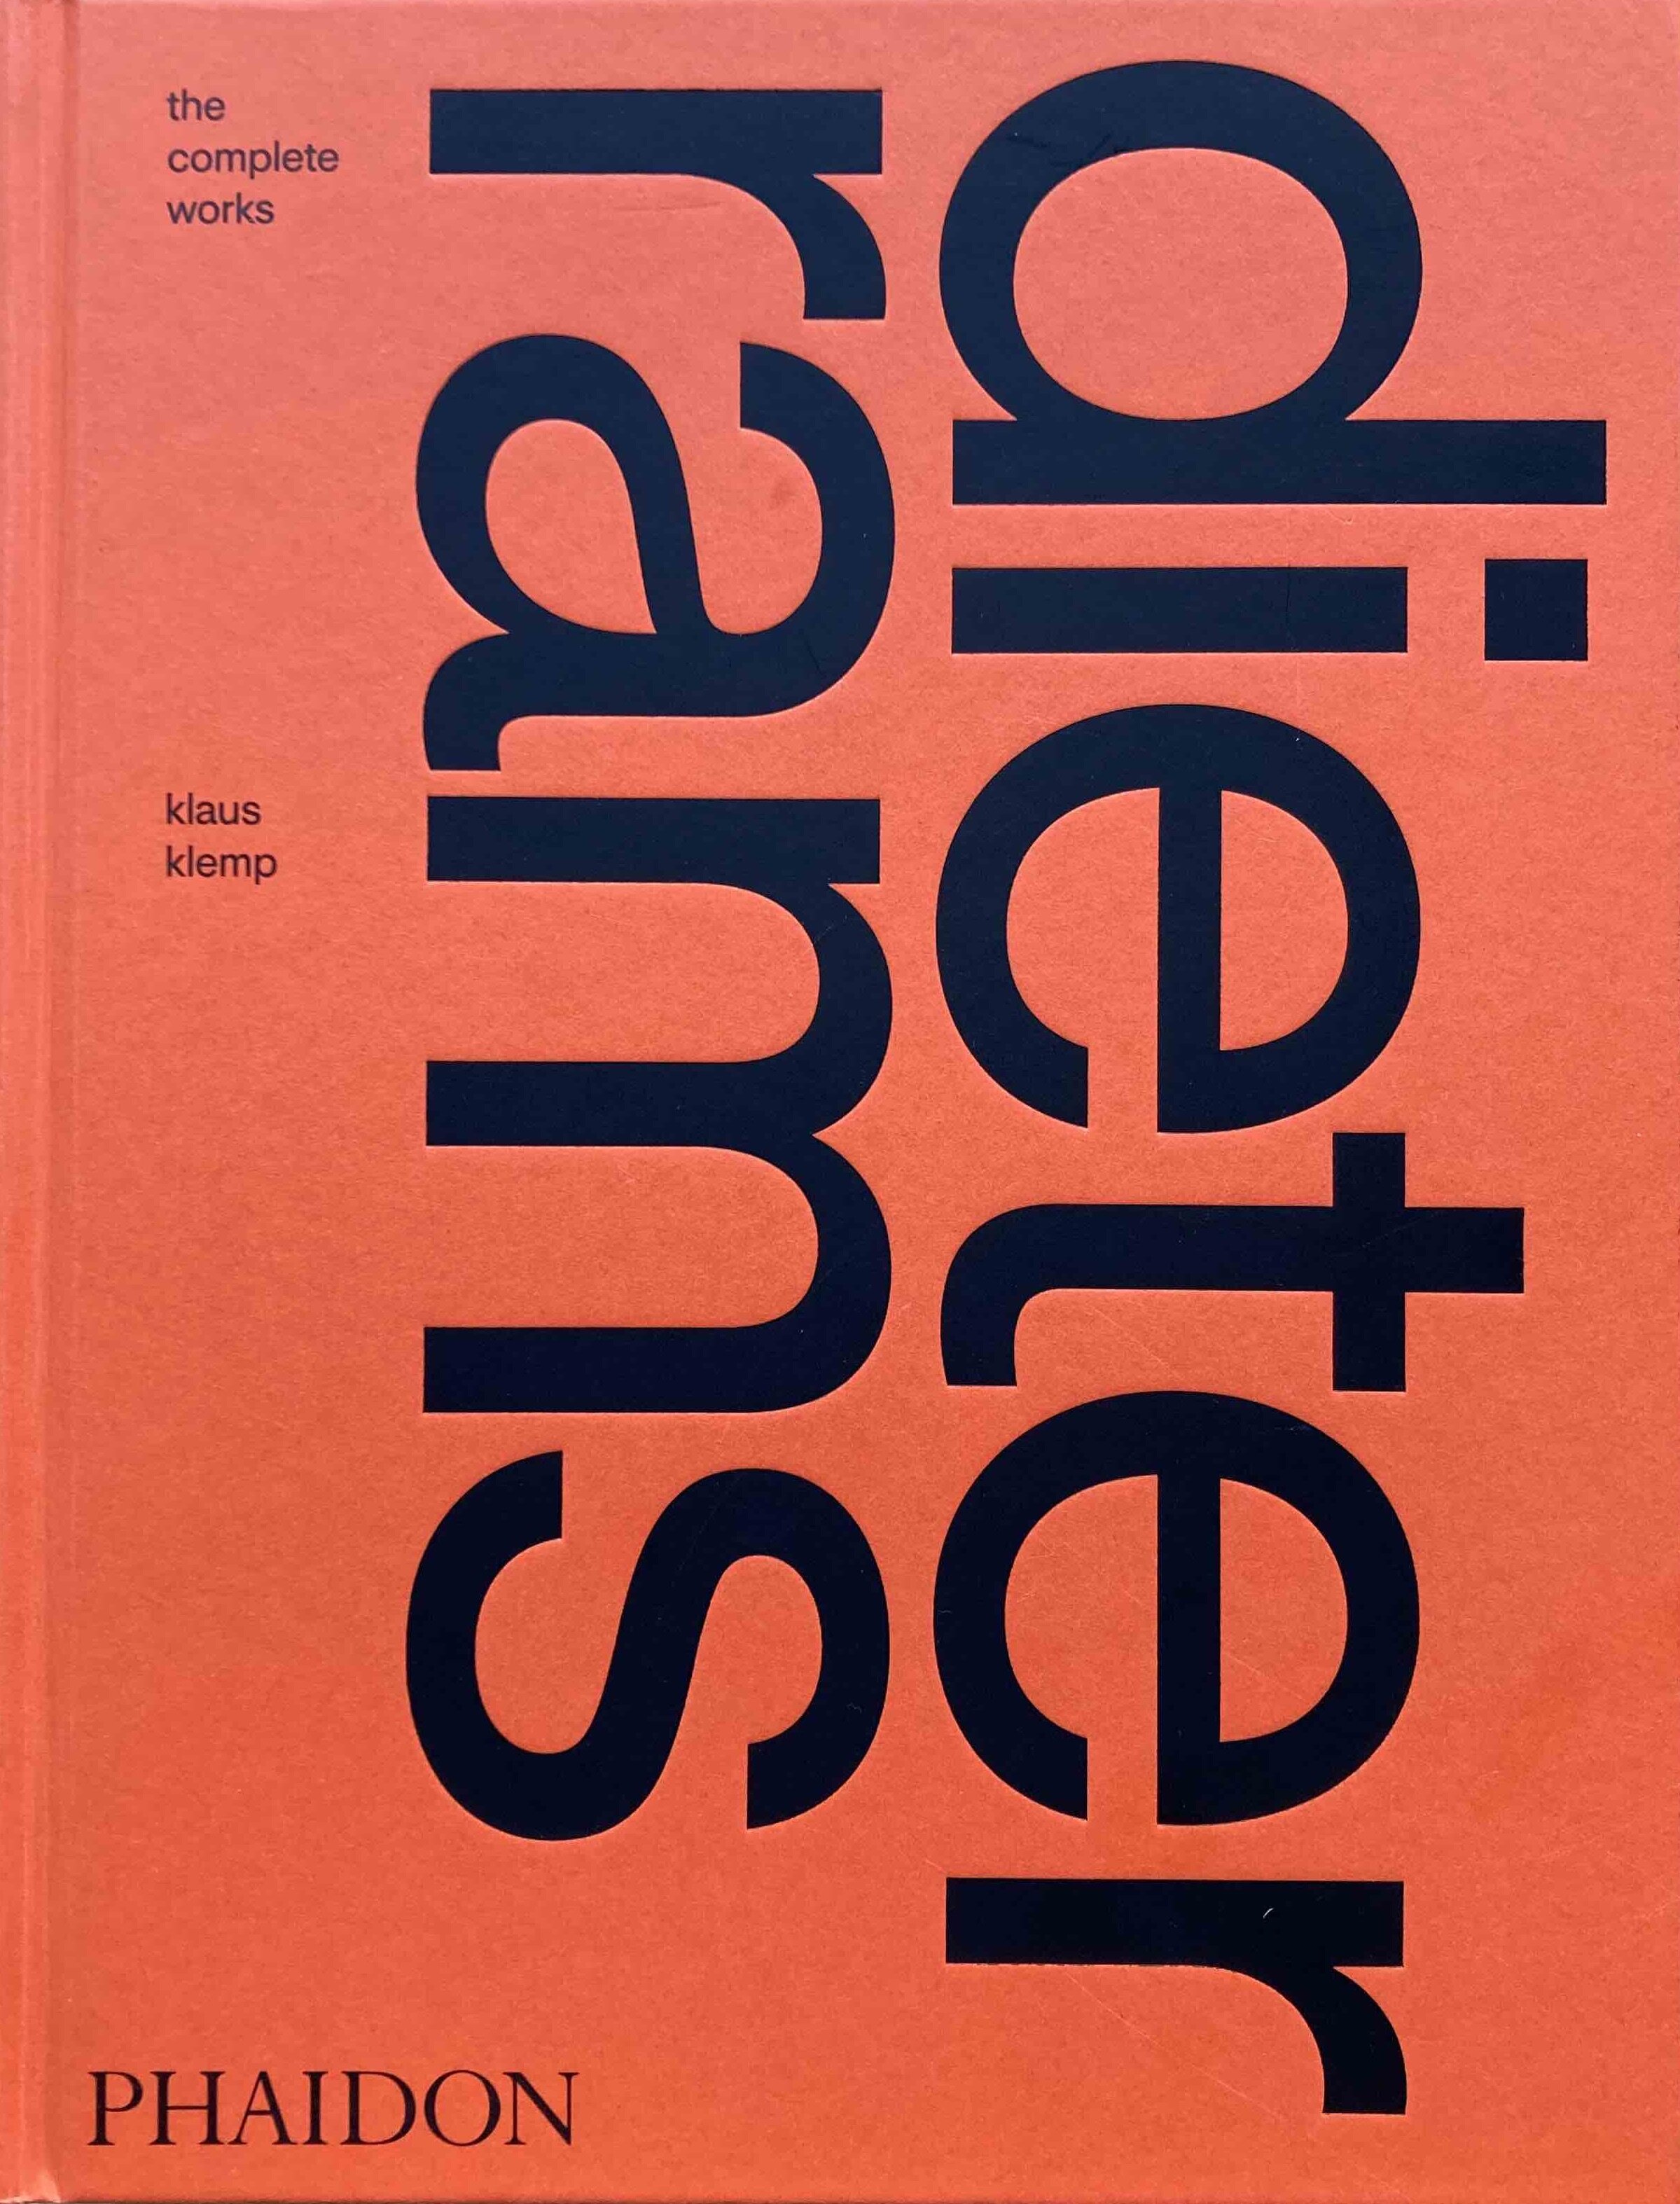 dieter rams : the complete works（洋書／英語） — Modernist Mind 